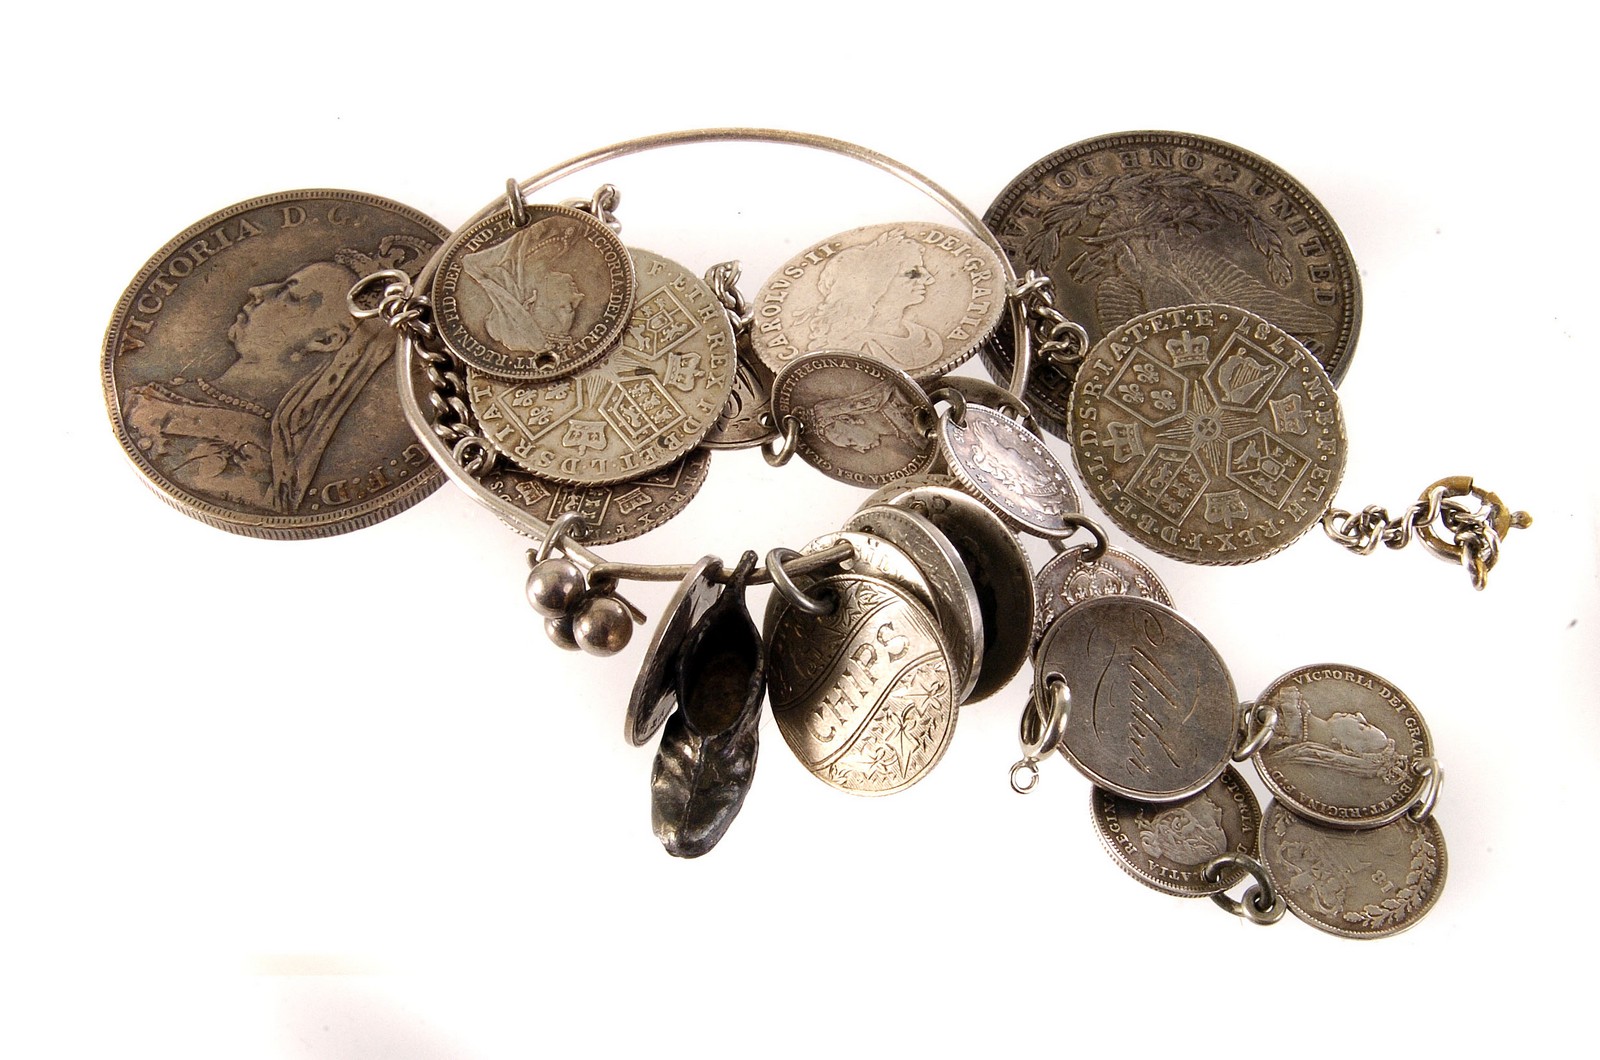 A collection of British and American coins, some mounted in jewellery, comprising a Charles II and